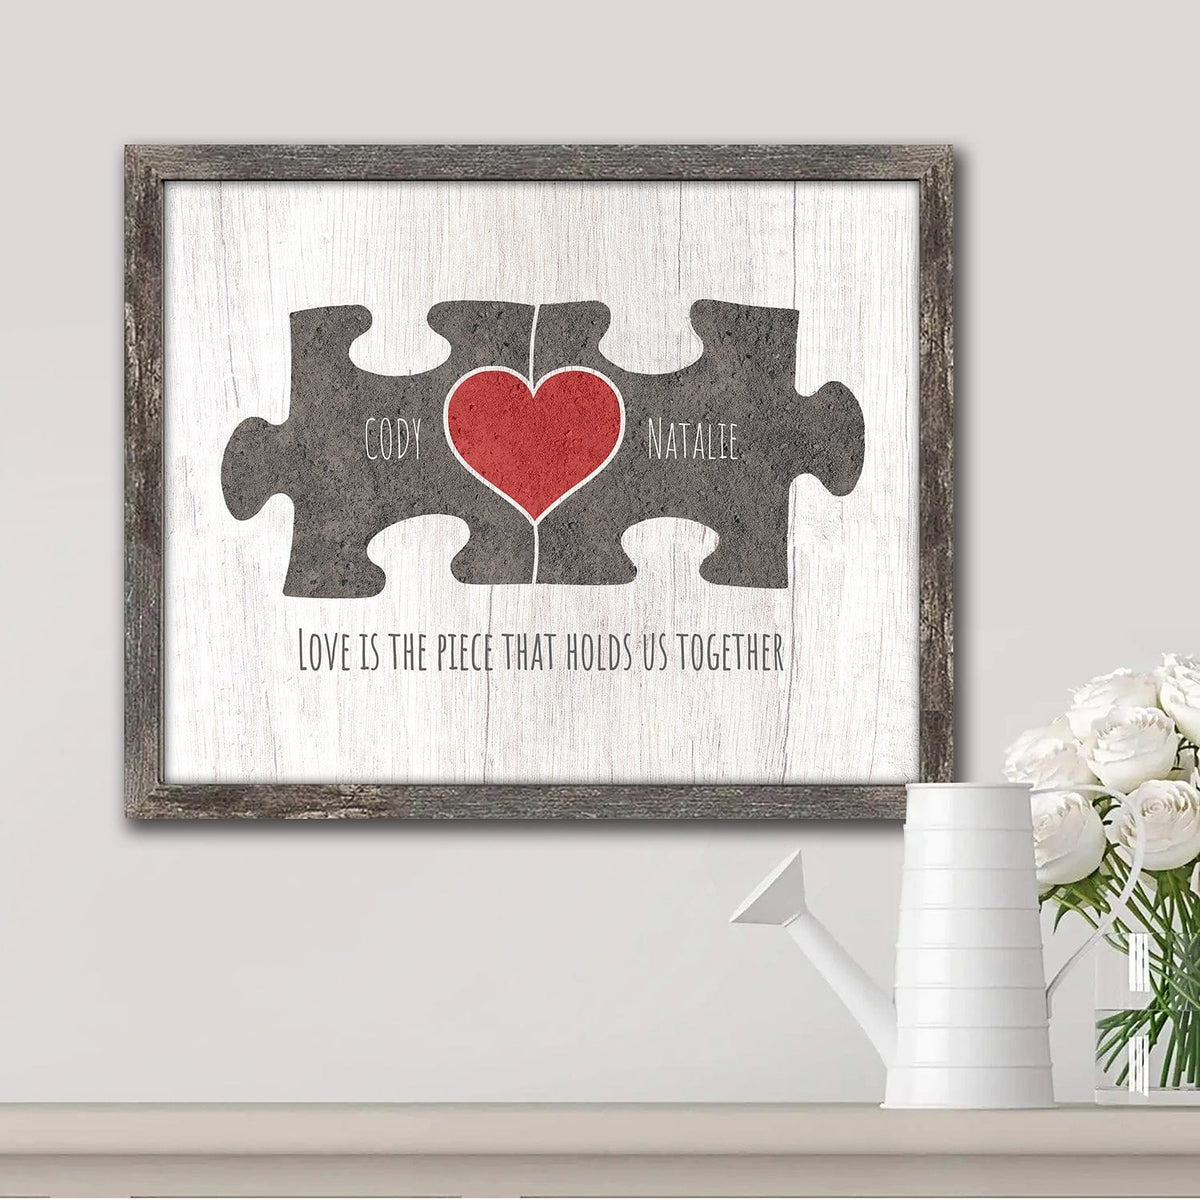 Shop personal prints for romantic personalized gifts